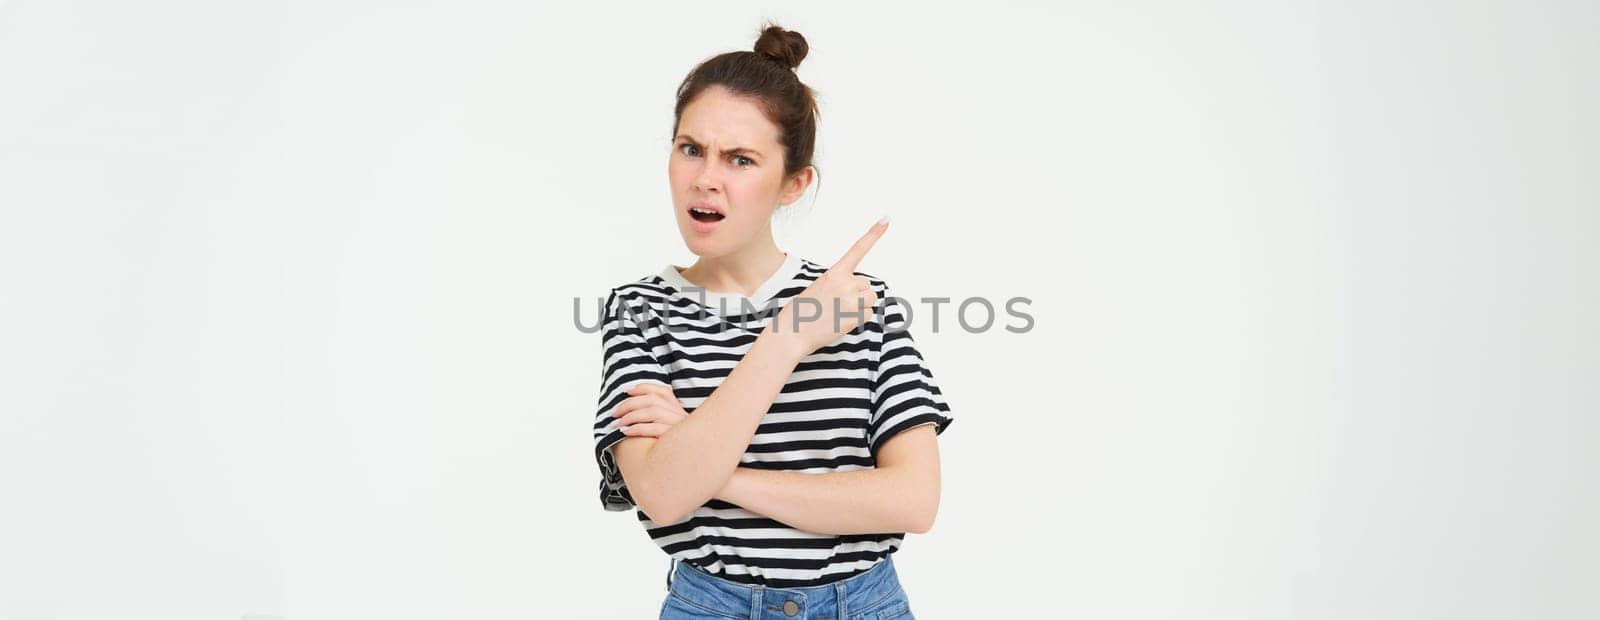 Portrait of frustrated, angry woman demands answers, points at something upsetting, disappointed by banner, showing left side, white background.